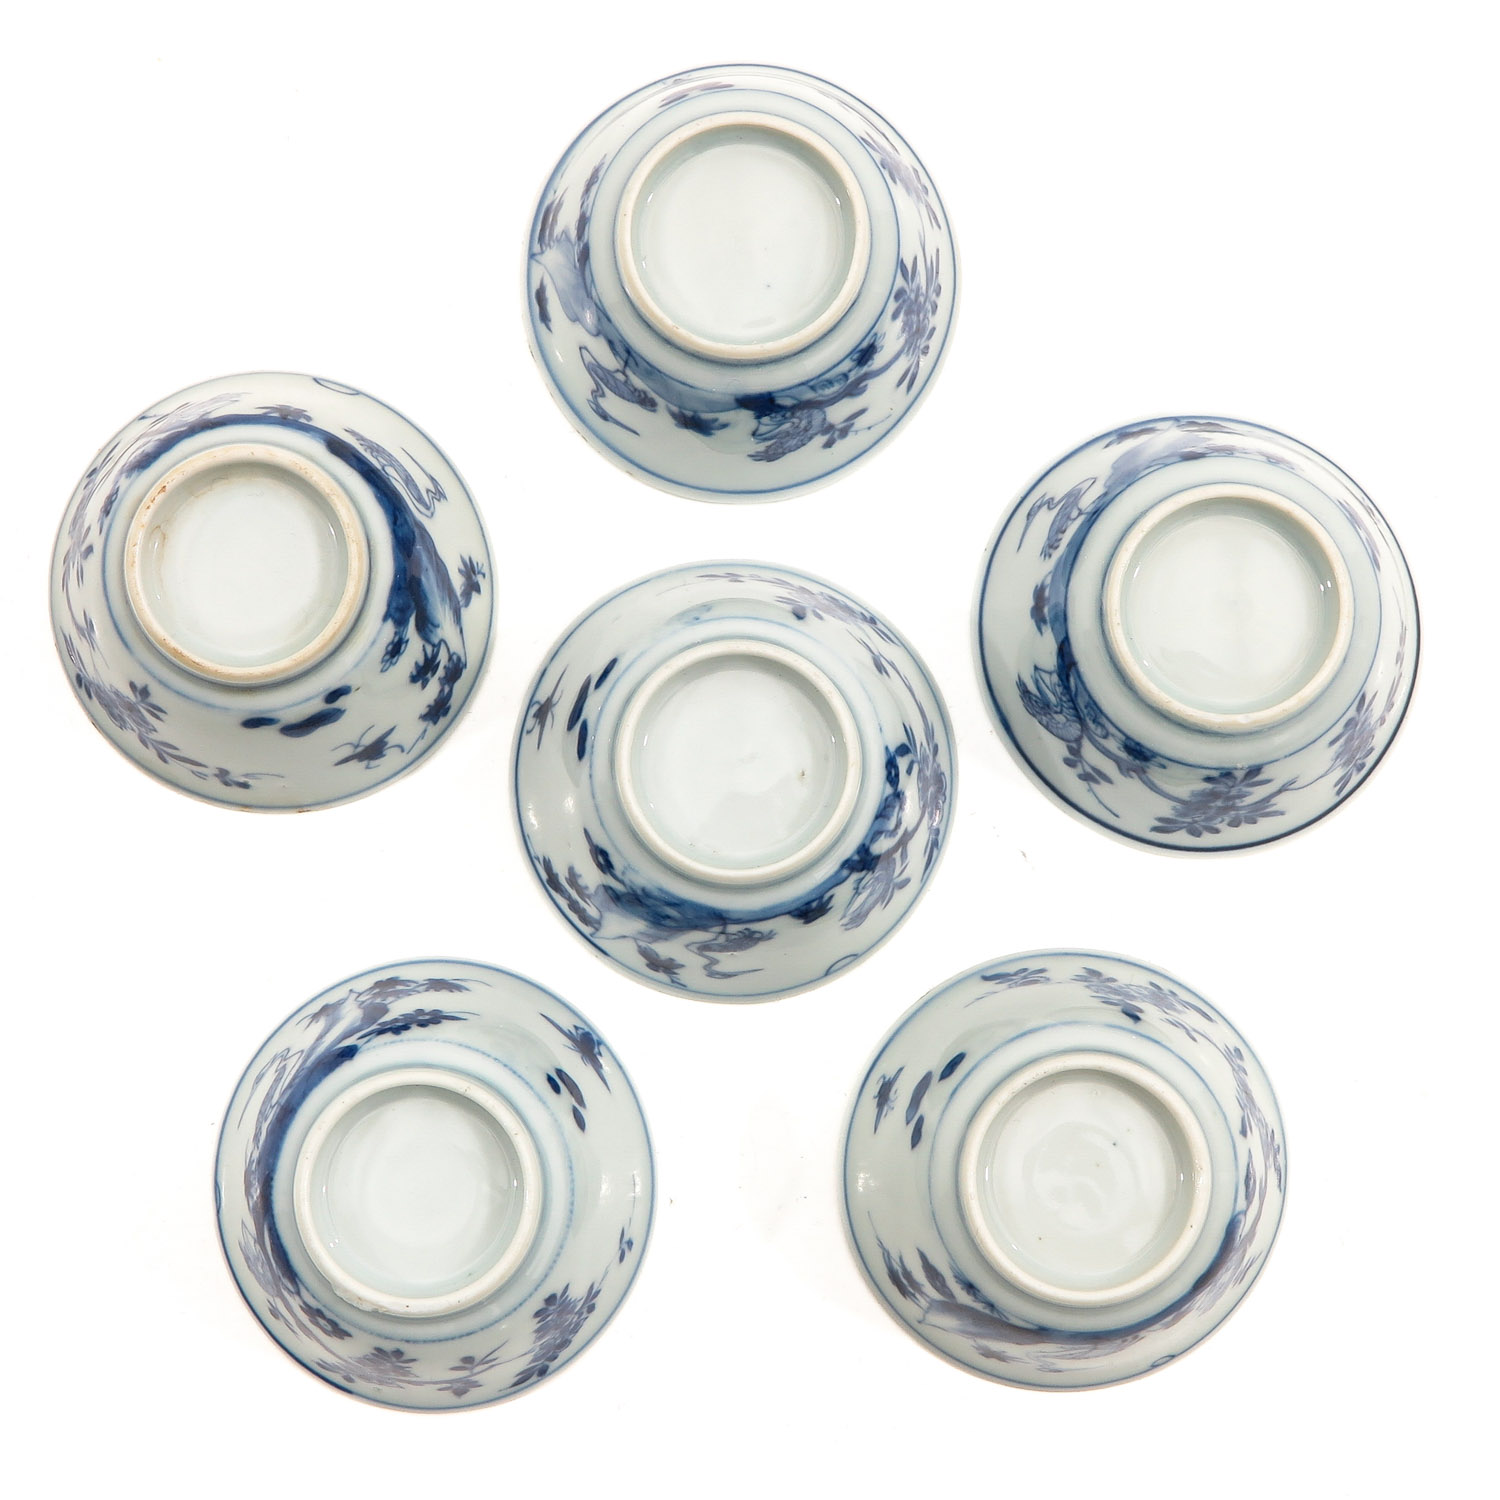 A Series of 6 Blue and White Cups and Saucers - Image 6 of 10